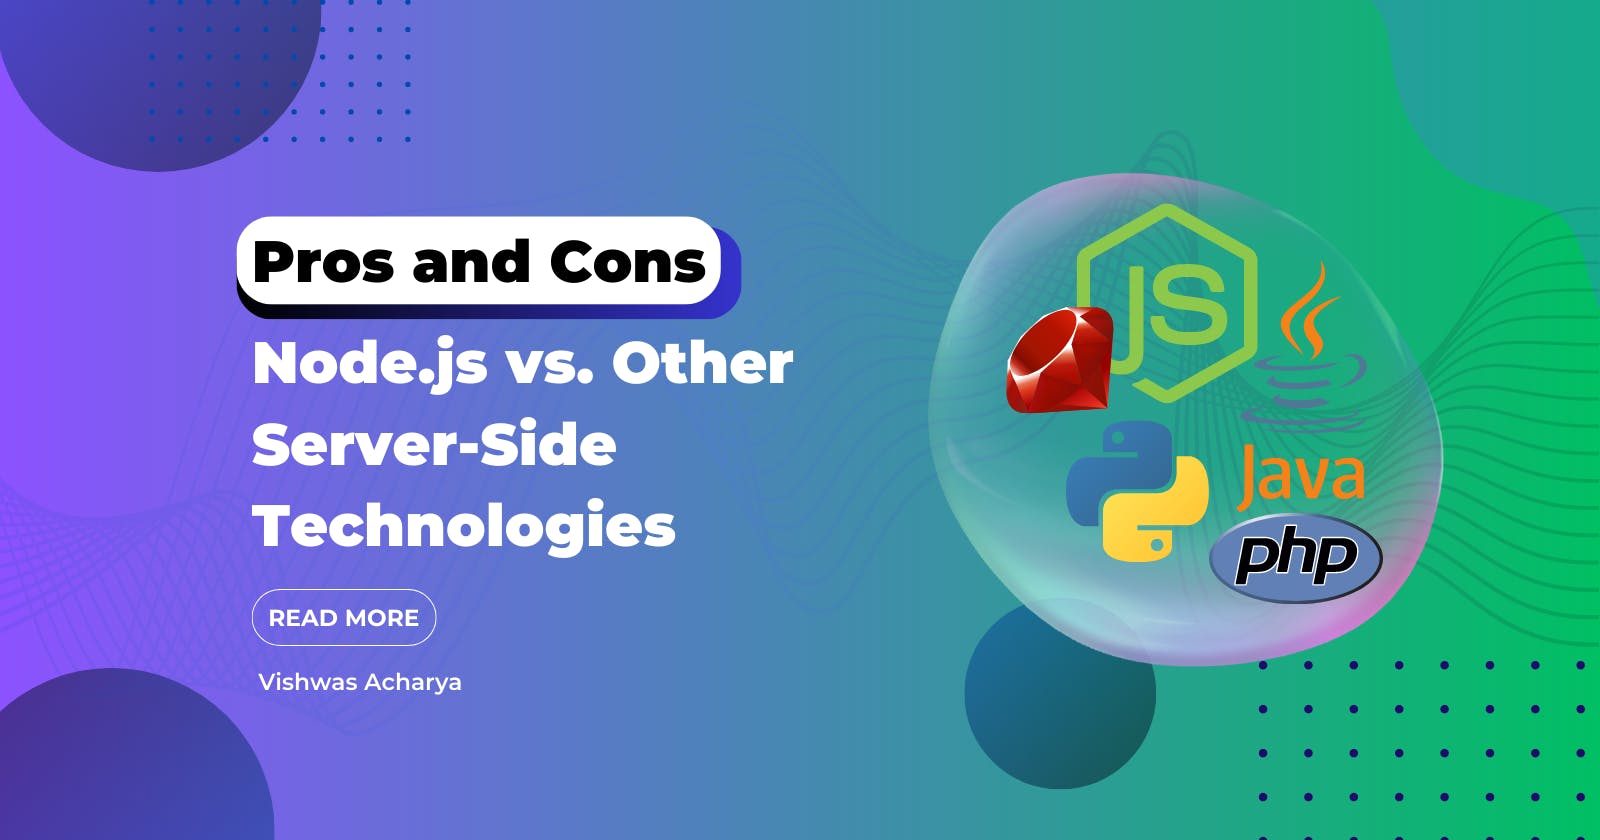 Node.js vs. Other Server-Side Technologies: Pros and Cons